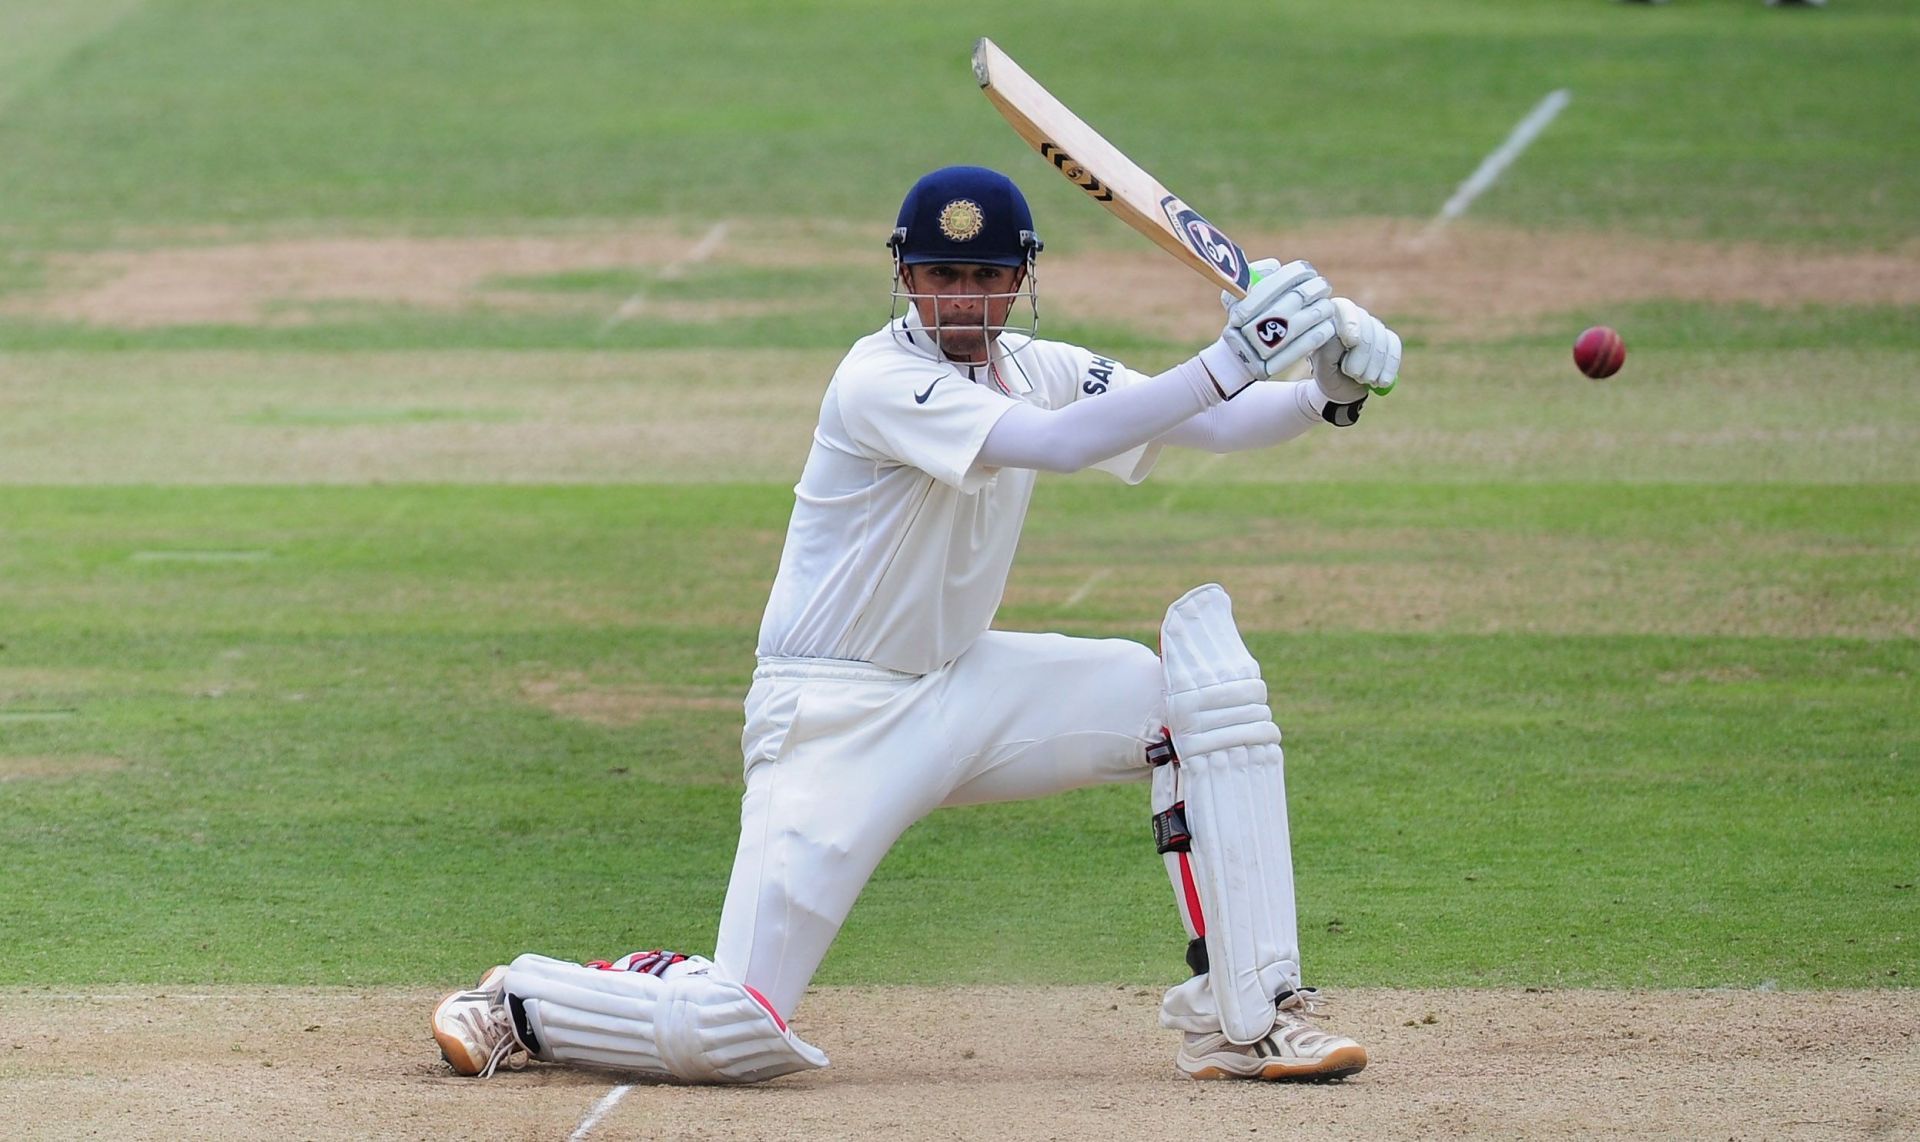 Rahul Dravid has a top score of 148 in South Africa